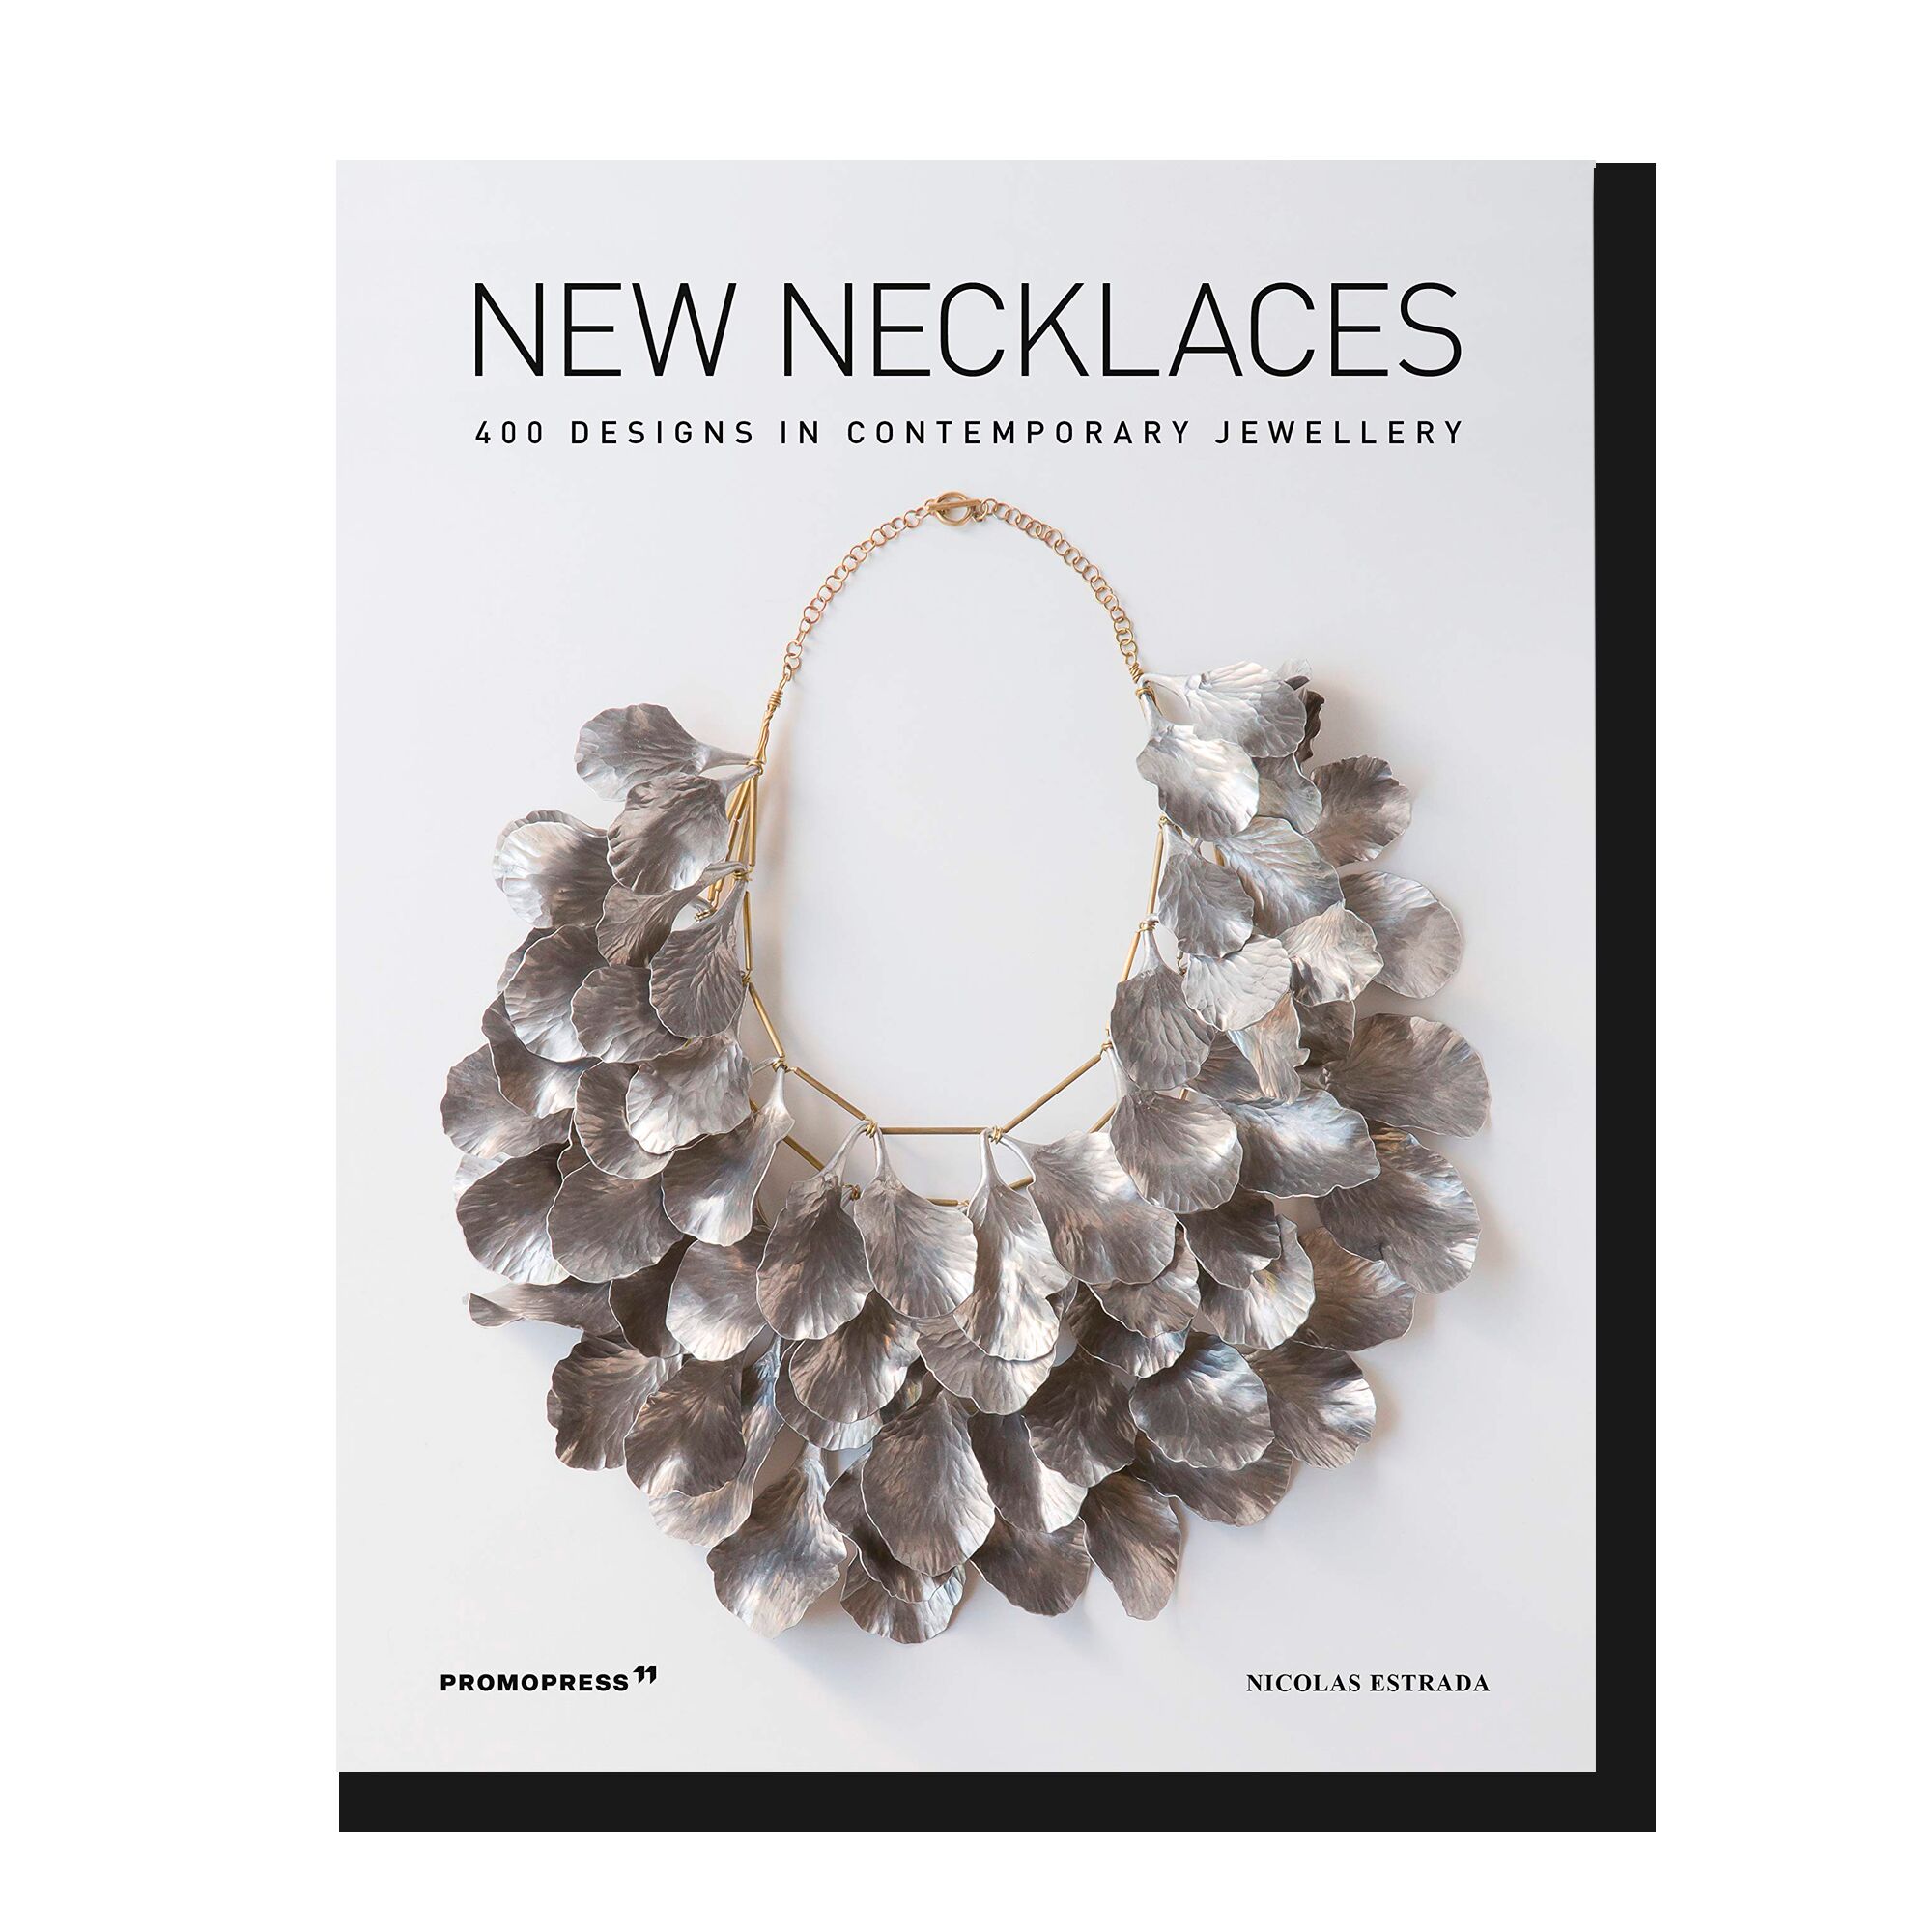 New Necklaces: 400 Designs in Contemporary Jewellery